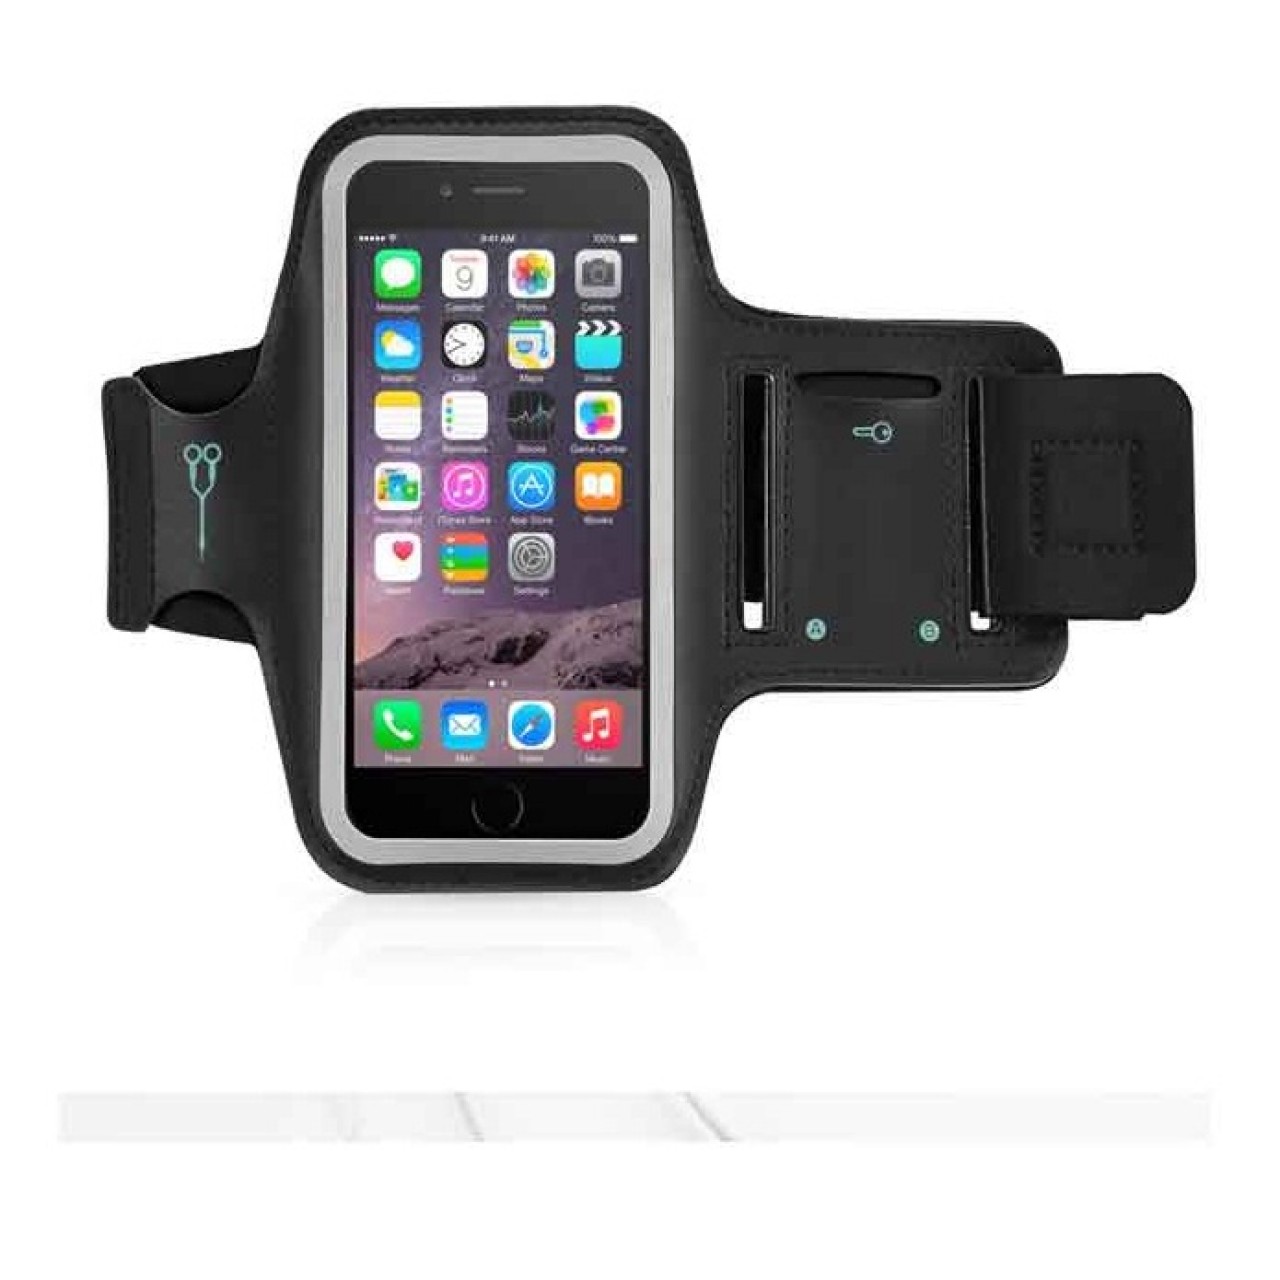 Mobile Sports Running Arm Band - Black